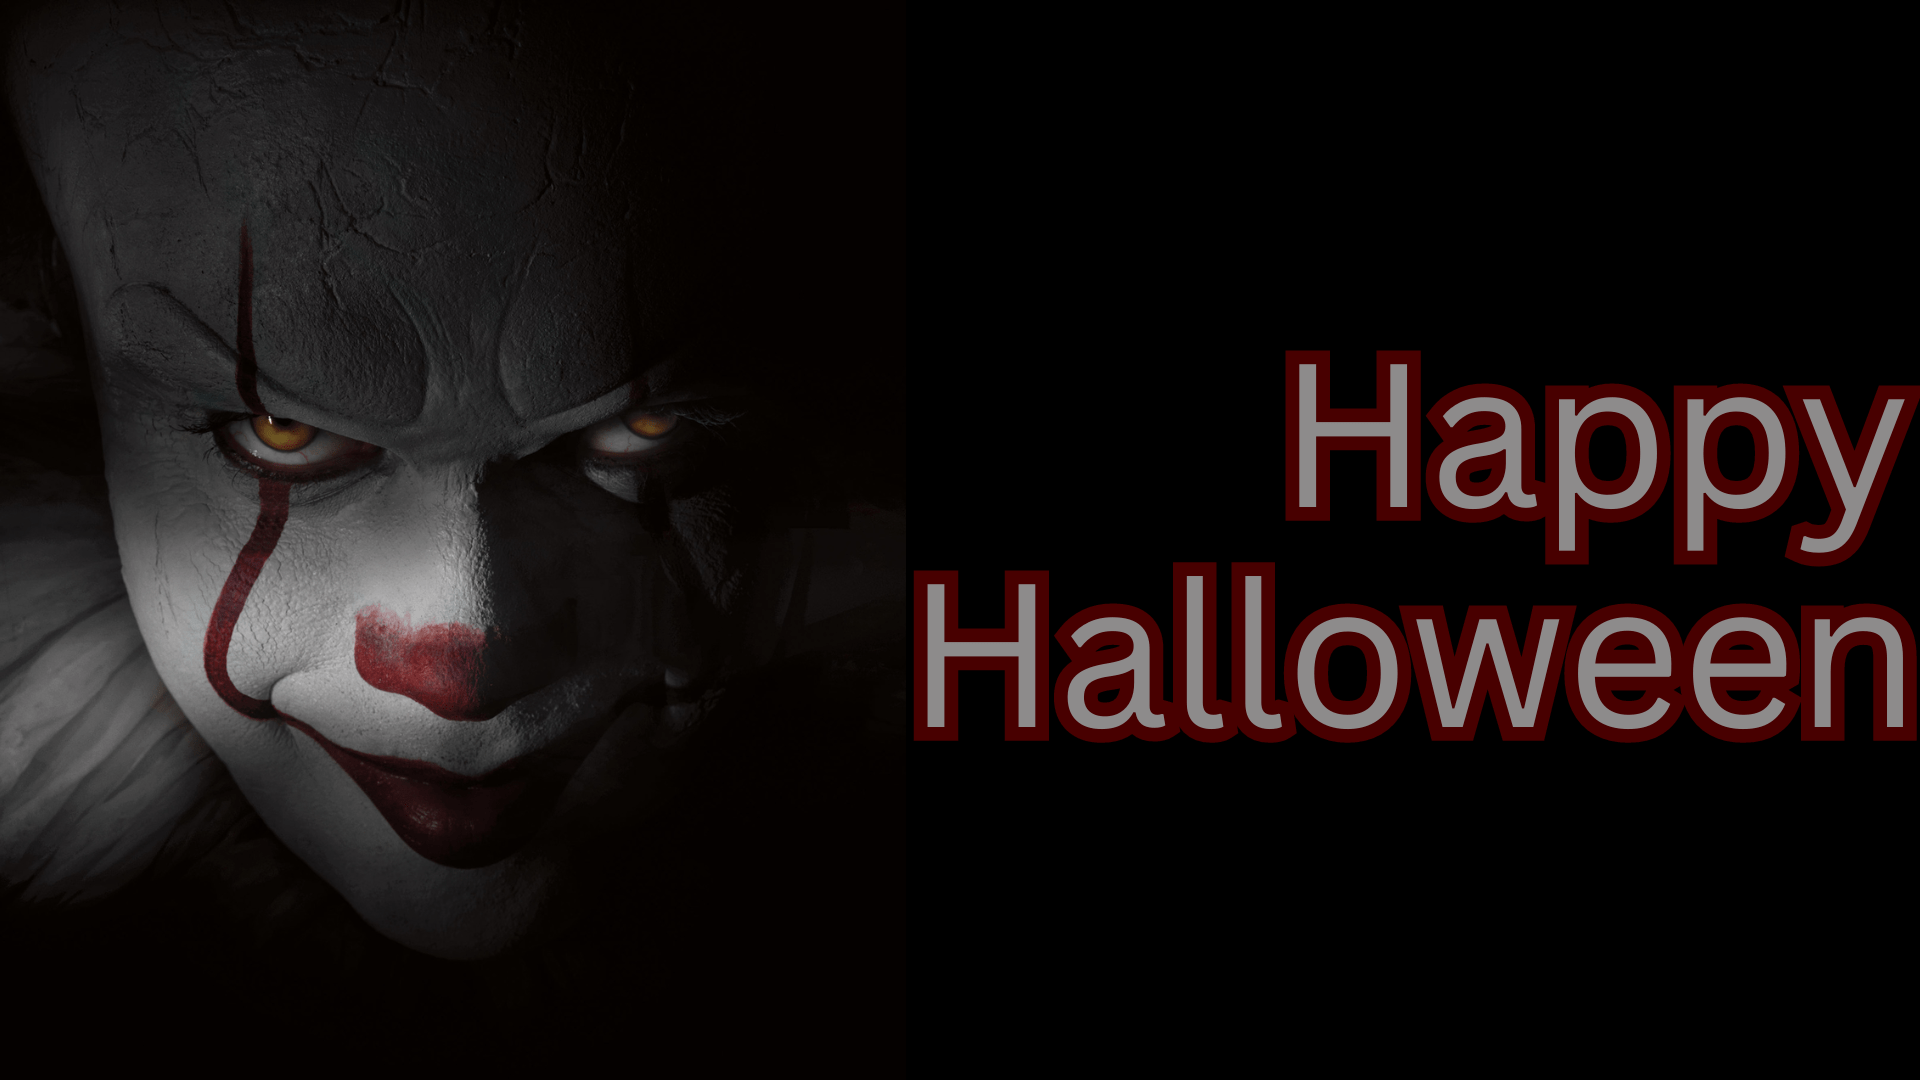 Halloween Wallpaper Collection [All image 1920x1080] [6 Image in total]